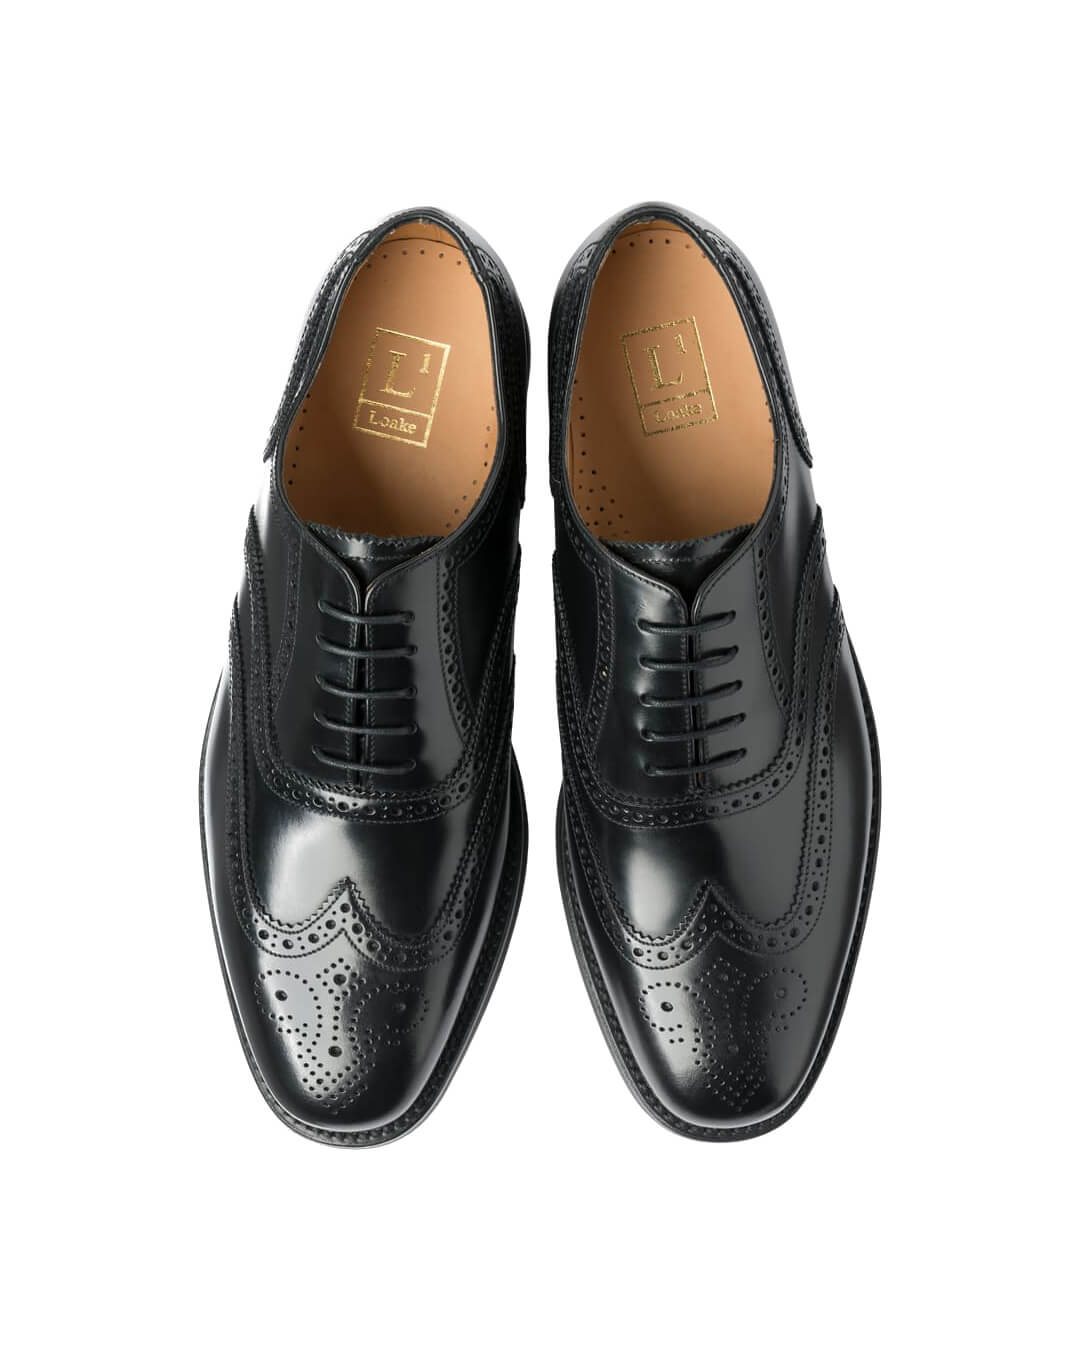 Loake Shoes Loake Black 302 Oford Wingtip Brogues Shoes